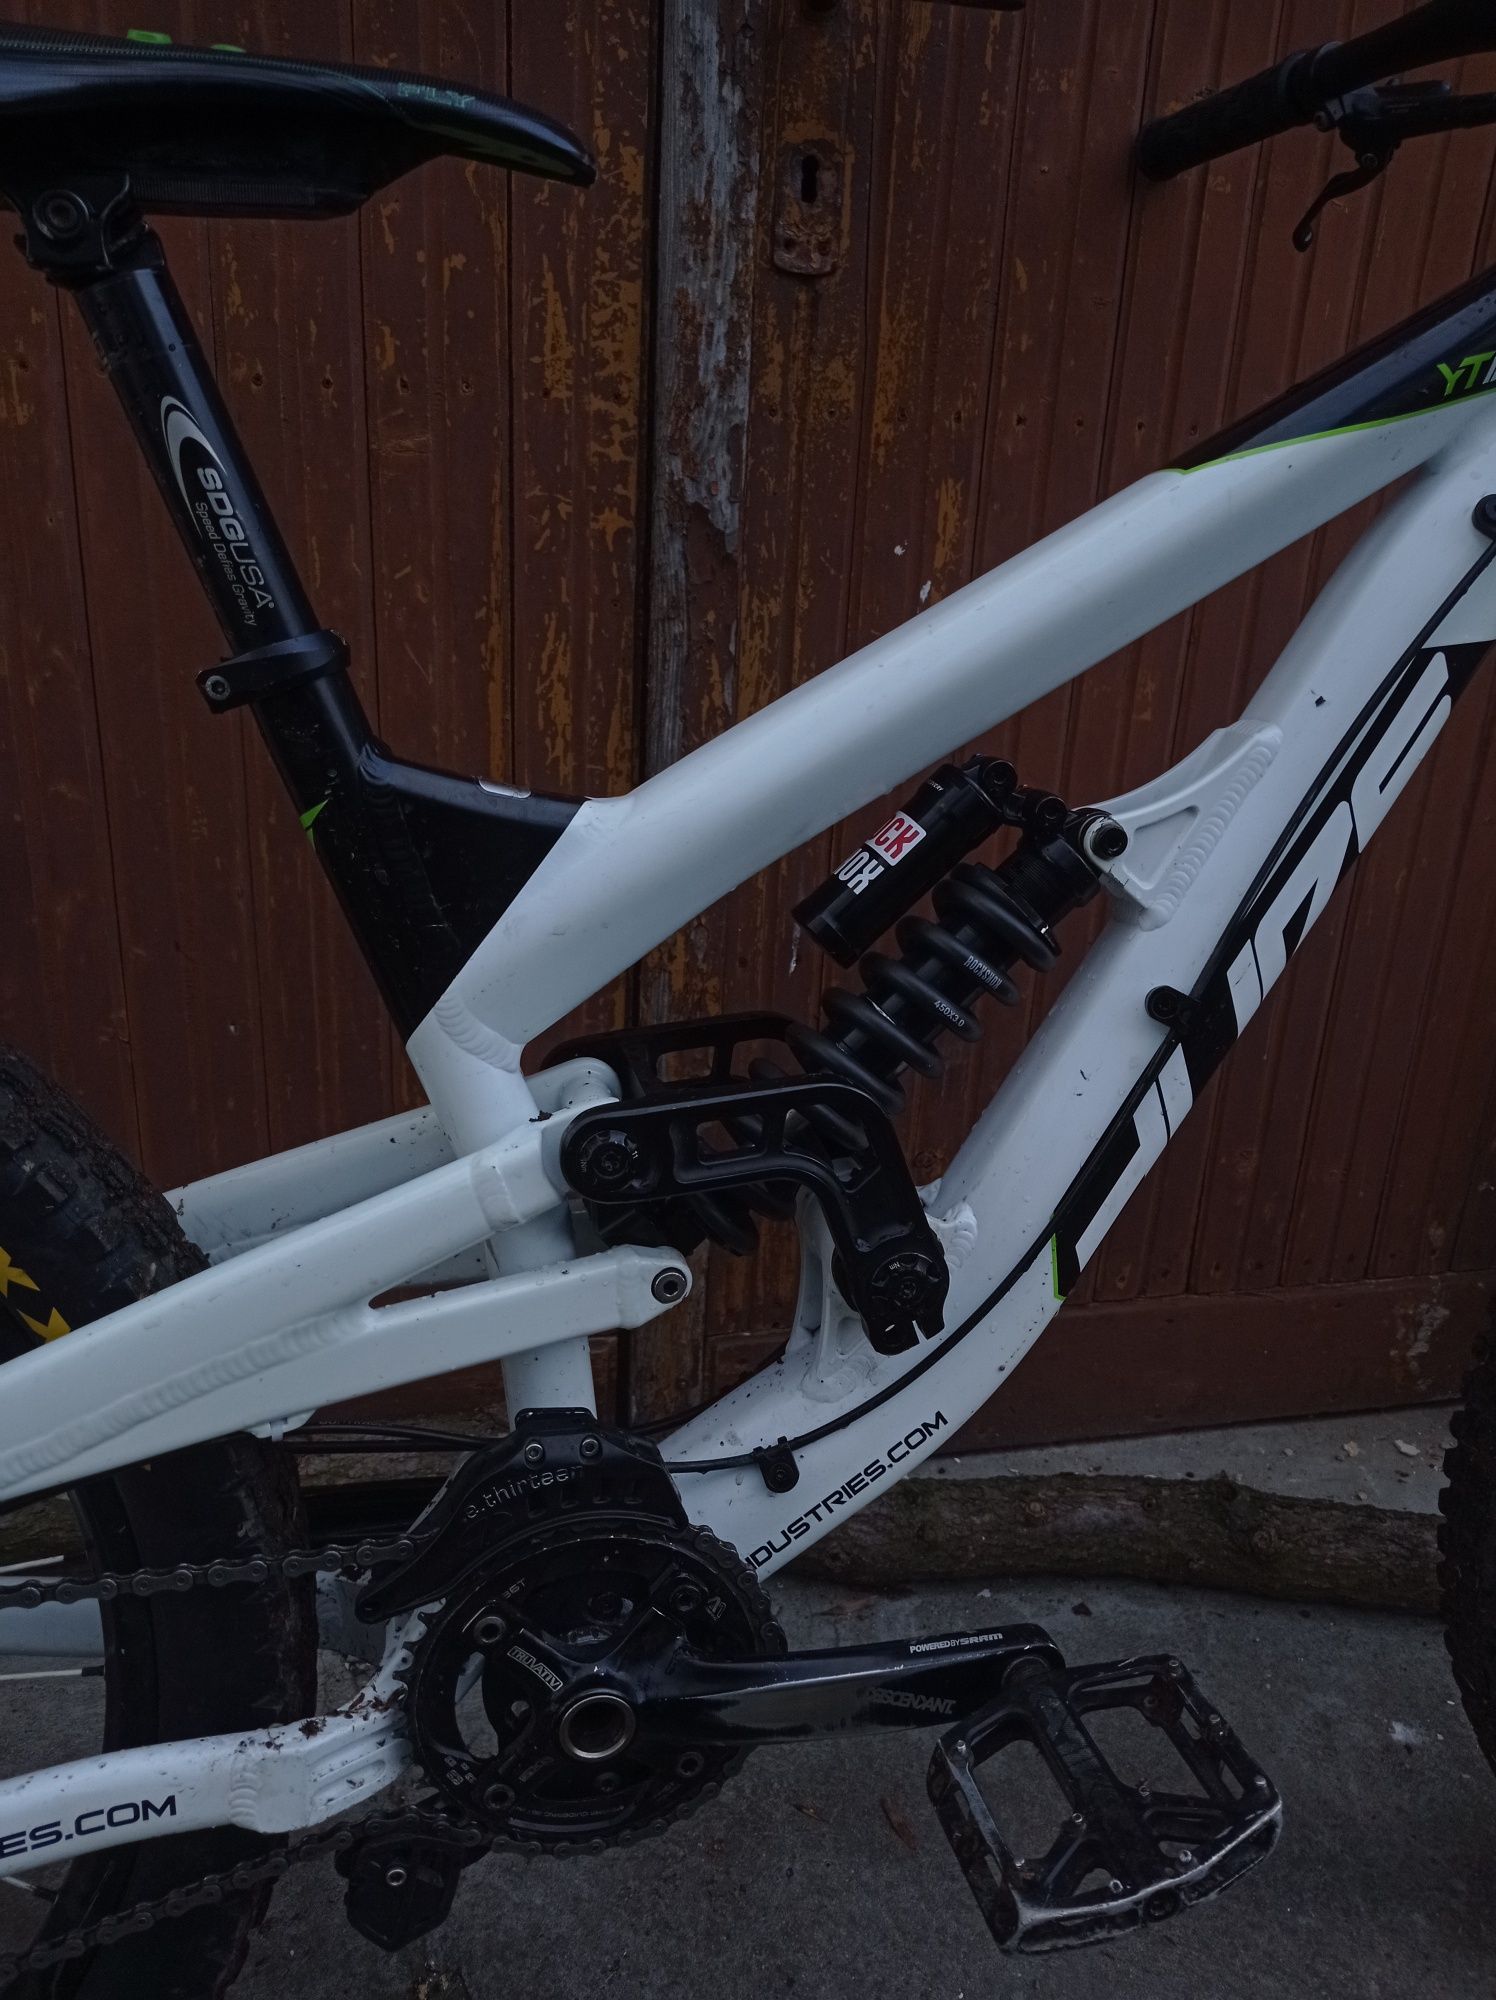 Rower Yt tues industries L (Dh Fr )